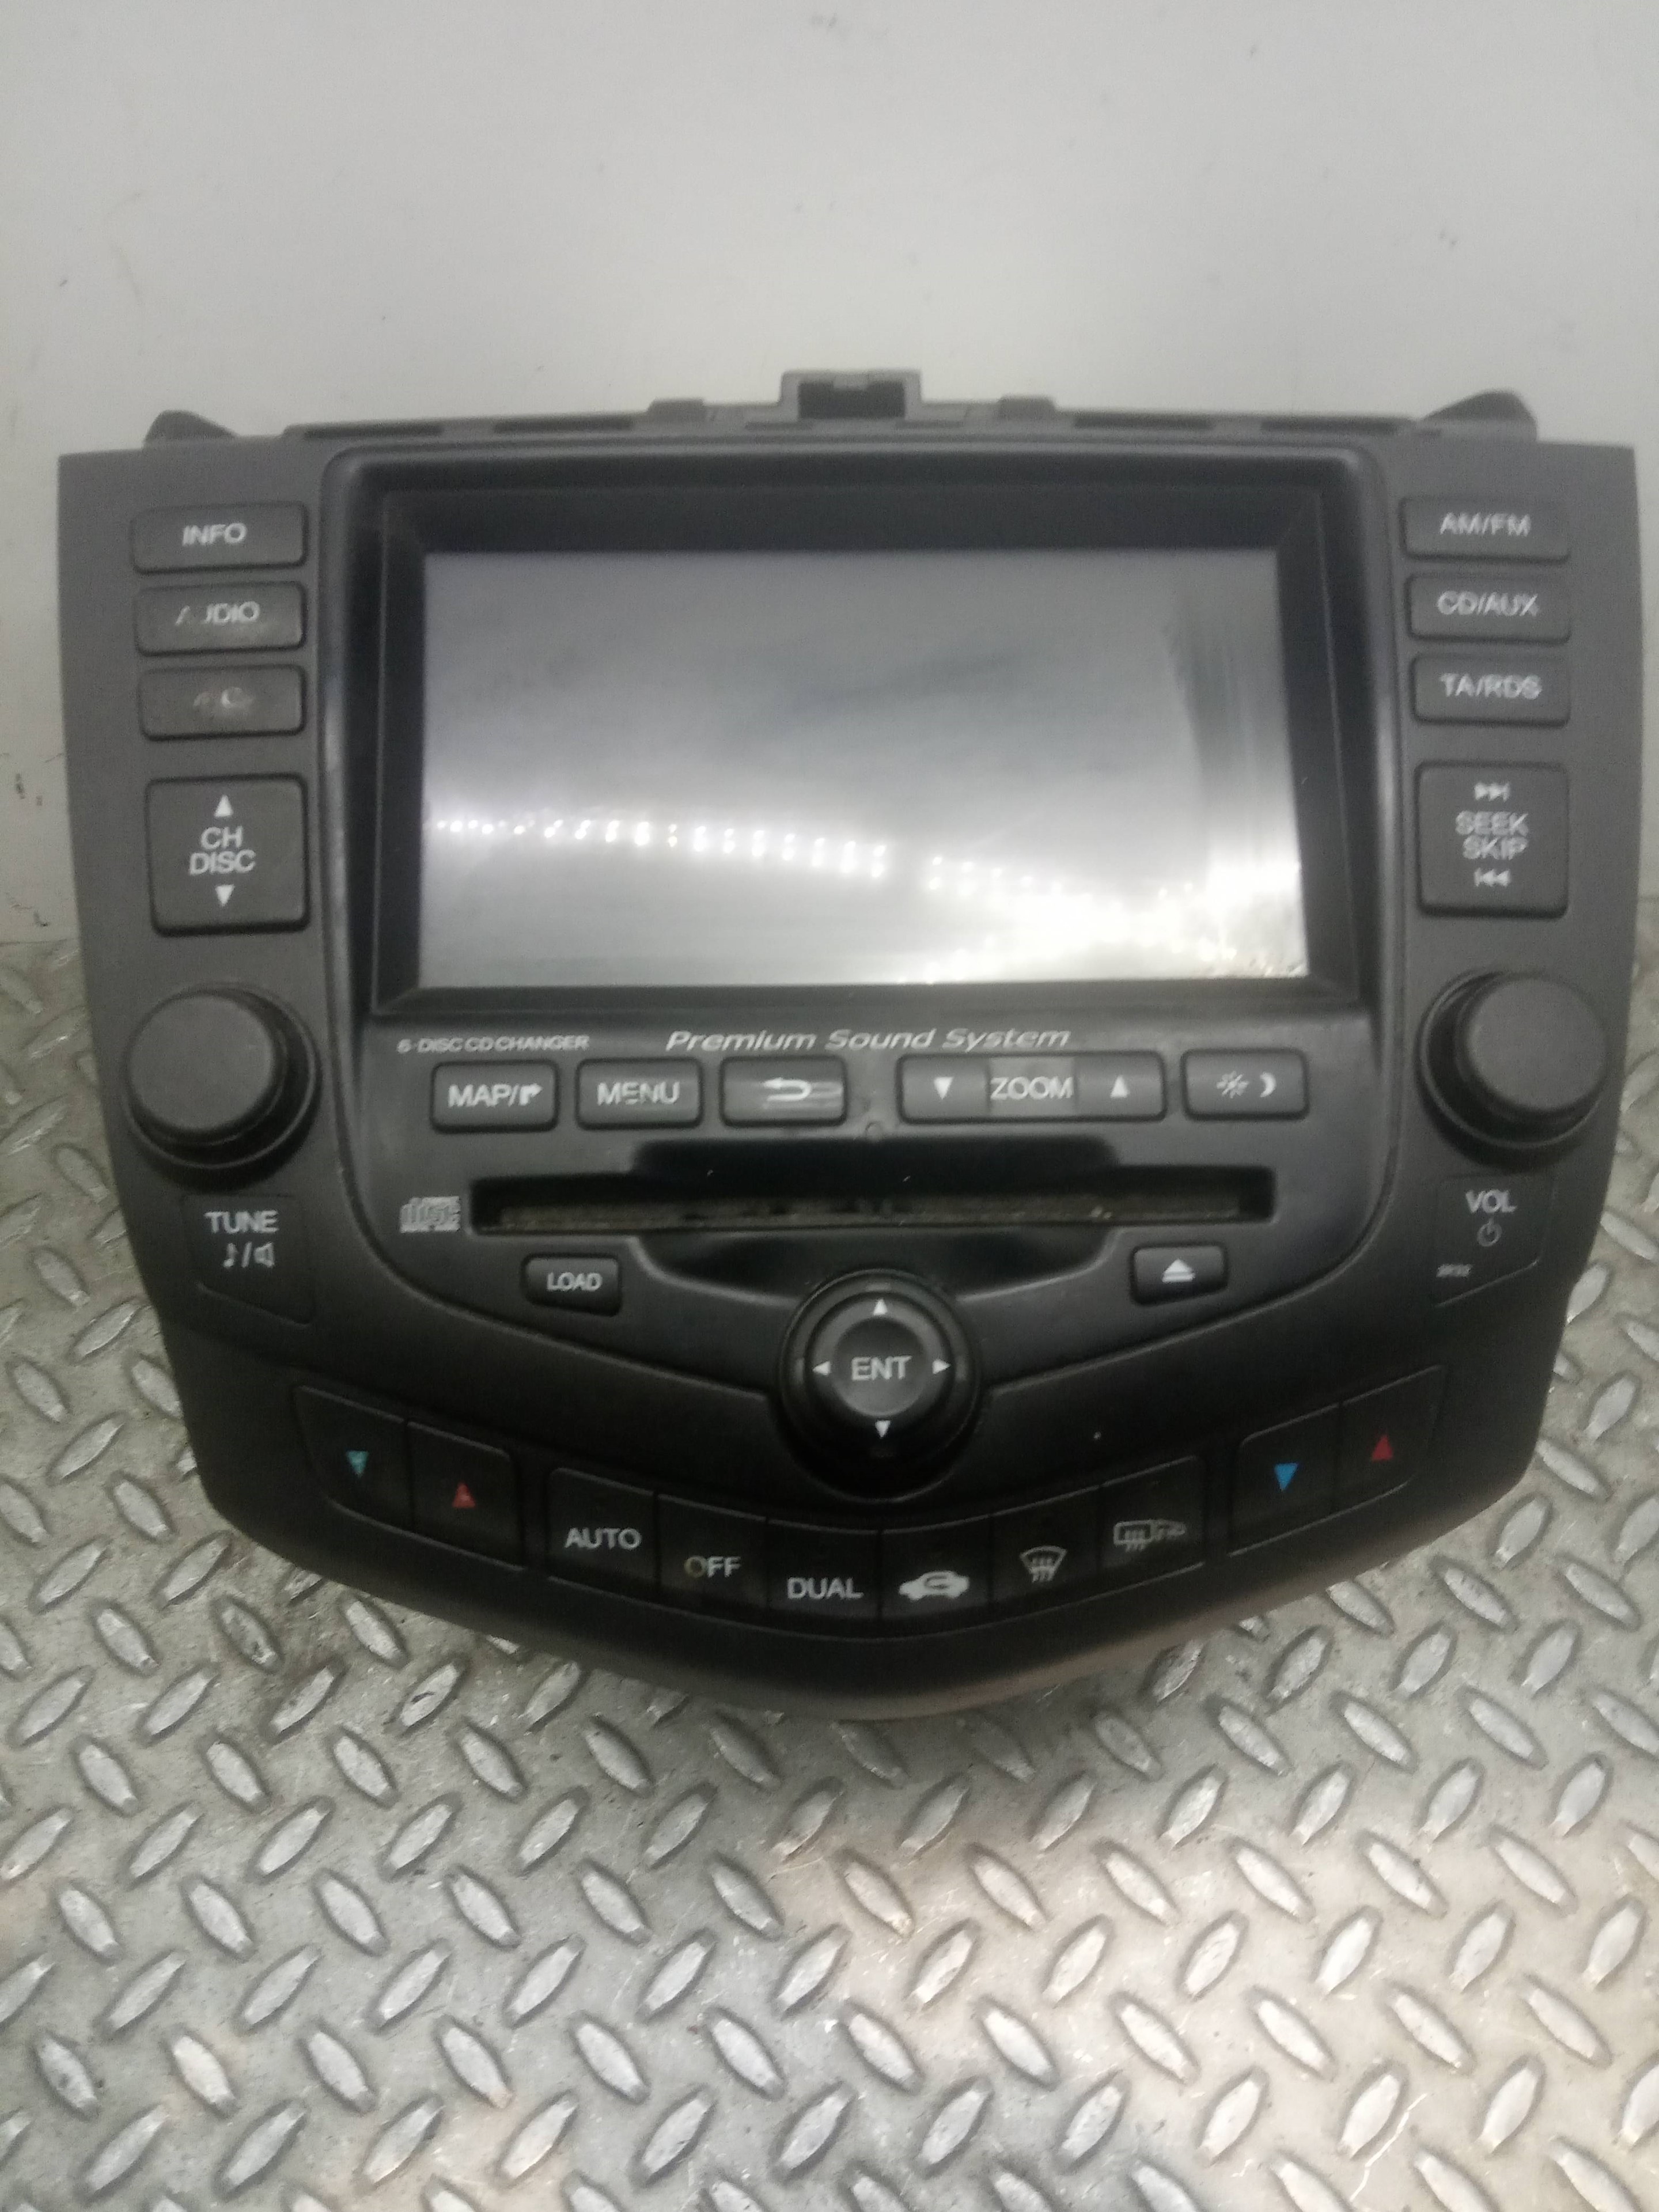 HONDA Accord 7 generation (2002-2008) Music Player With GPS 39050SEAG830M1, 39050SEAG830M1, RG846RO 23697538